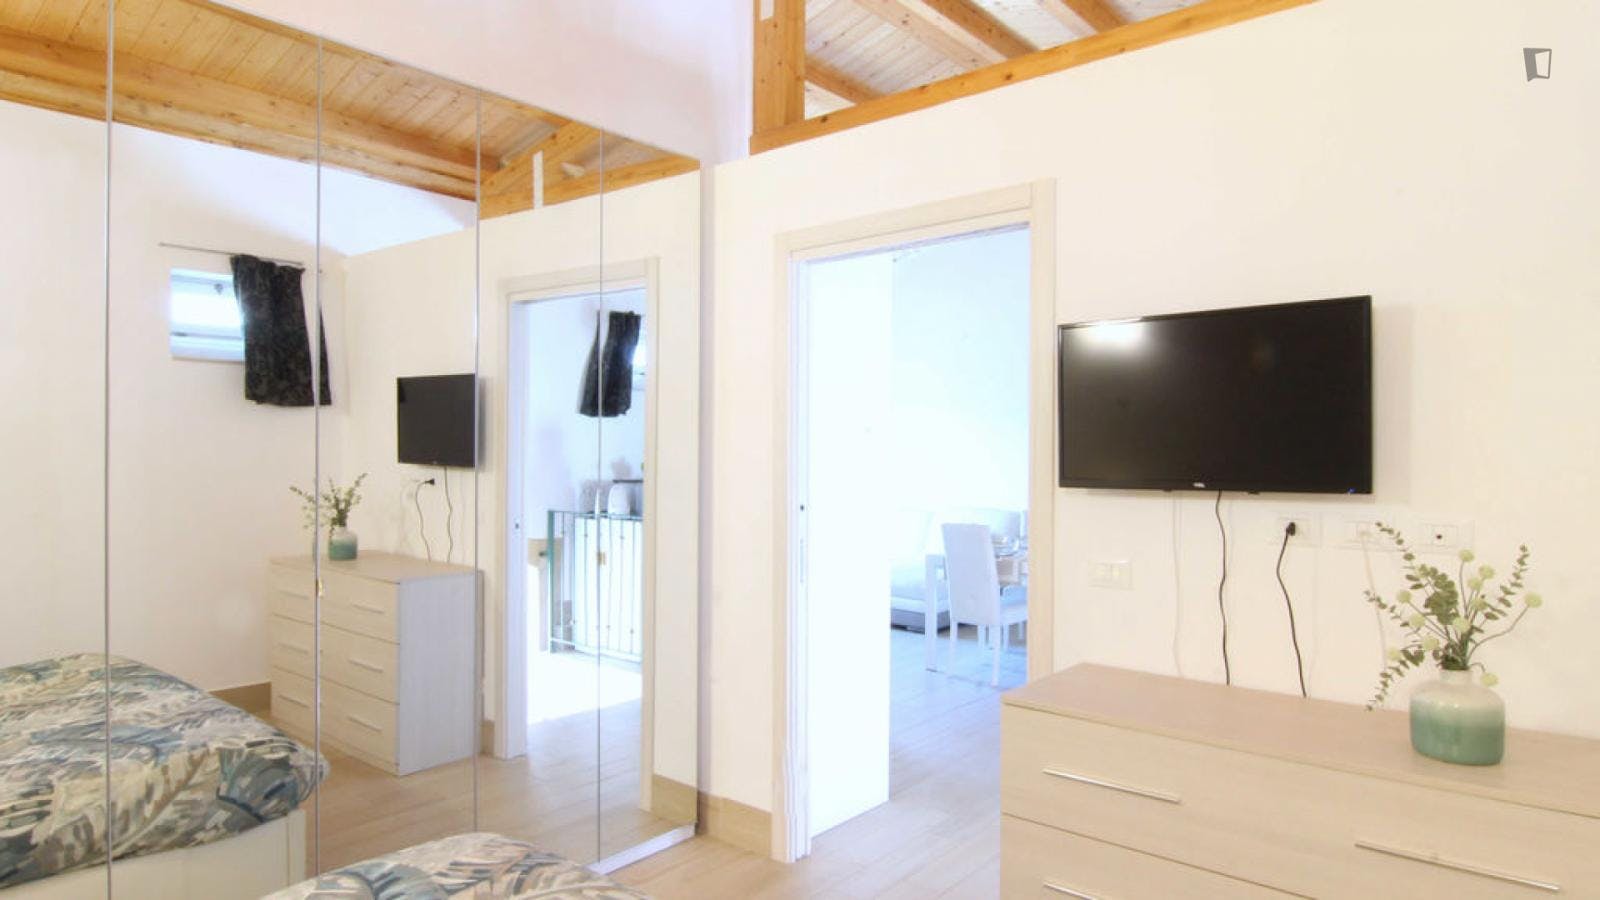 Cool 1-bedroom apartment in Siracusa